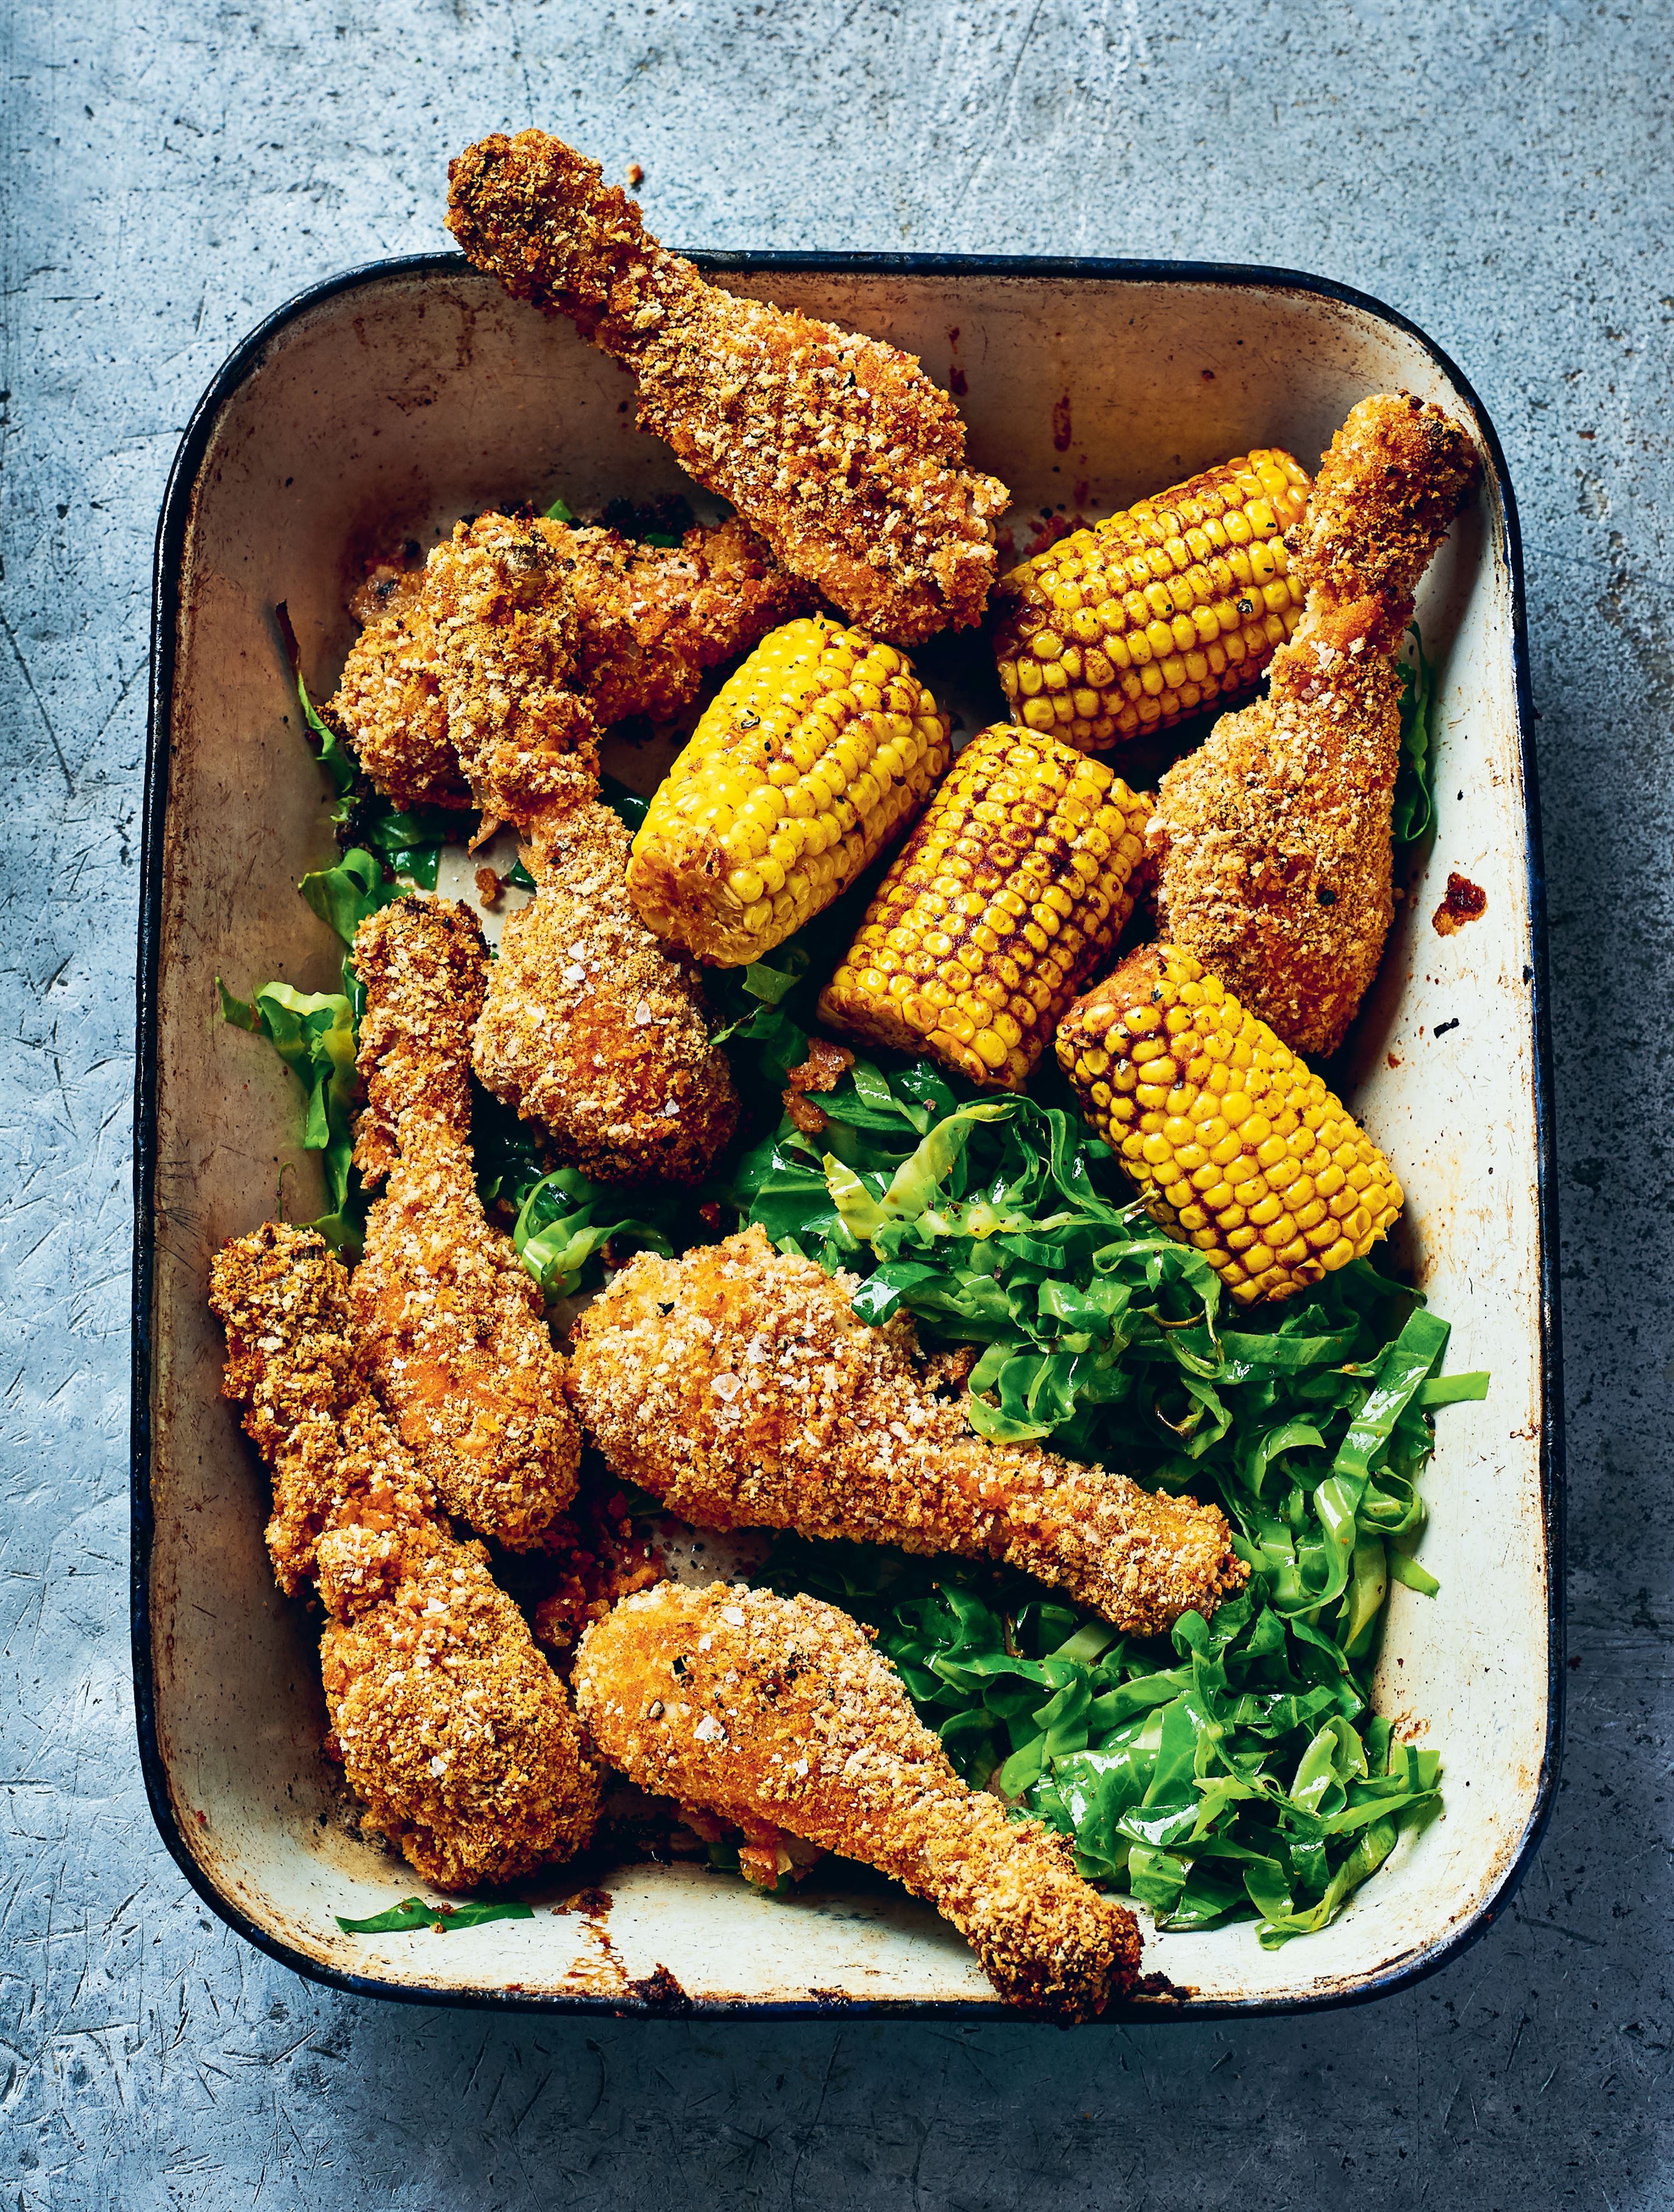 Oven ‘fried’ buttermilk chicken with corn and greens